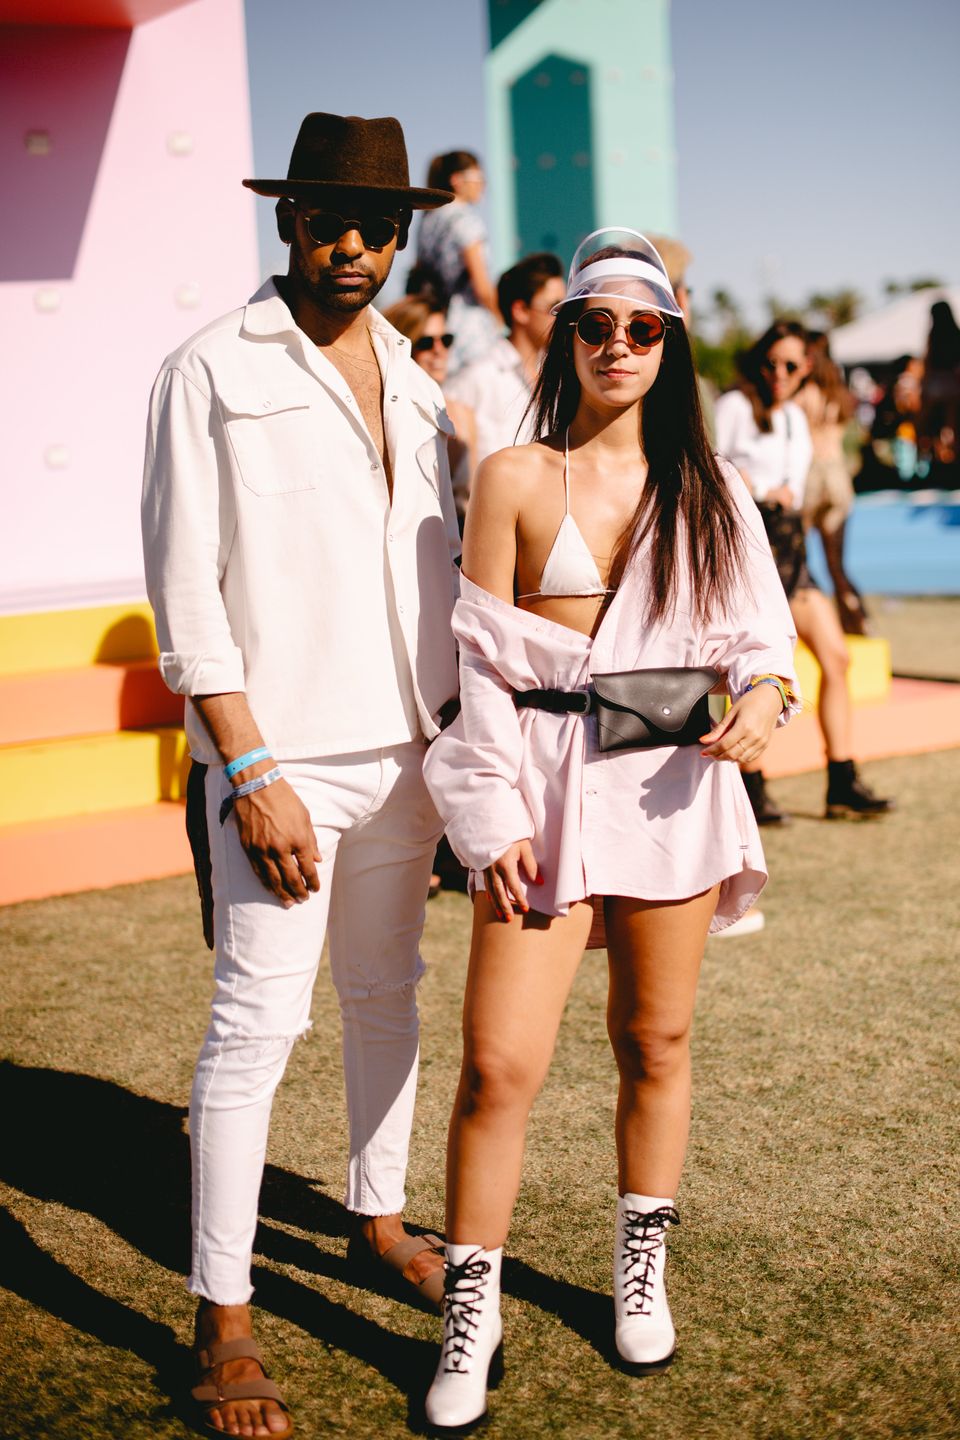 Rosalía outfit at Coachella 2019  Tracksuit women, Girly fashion